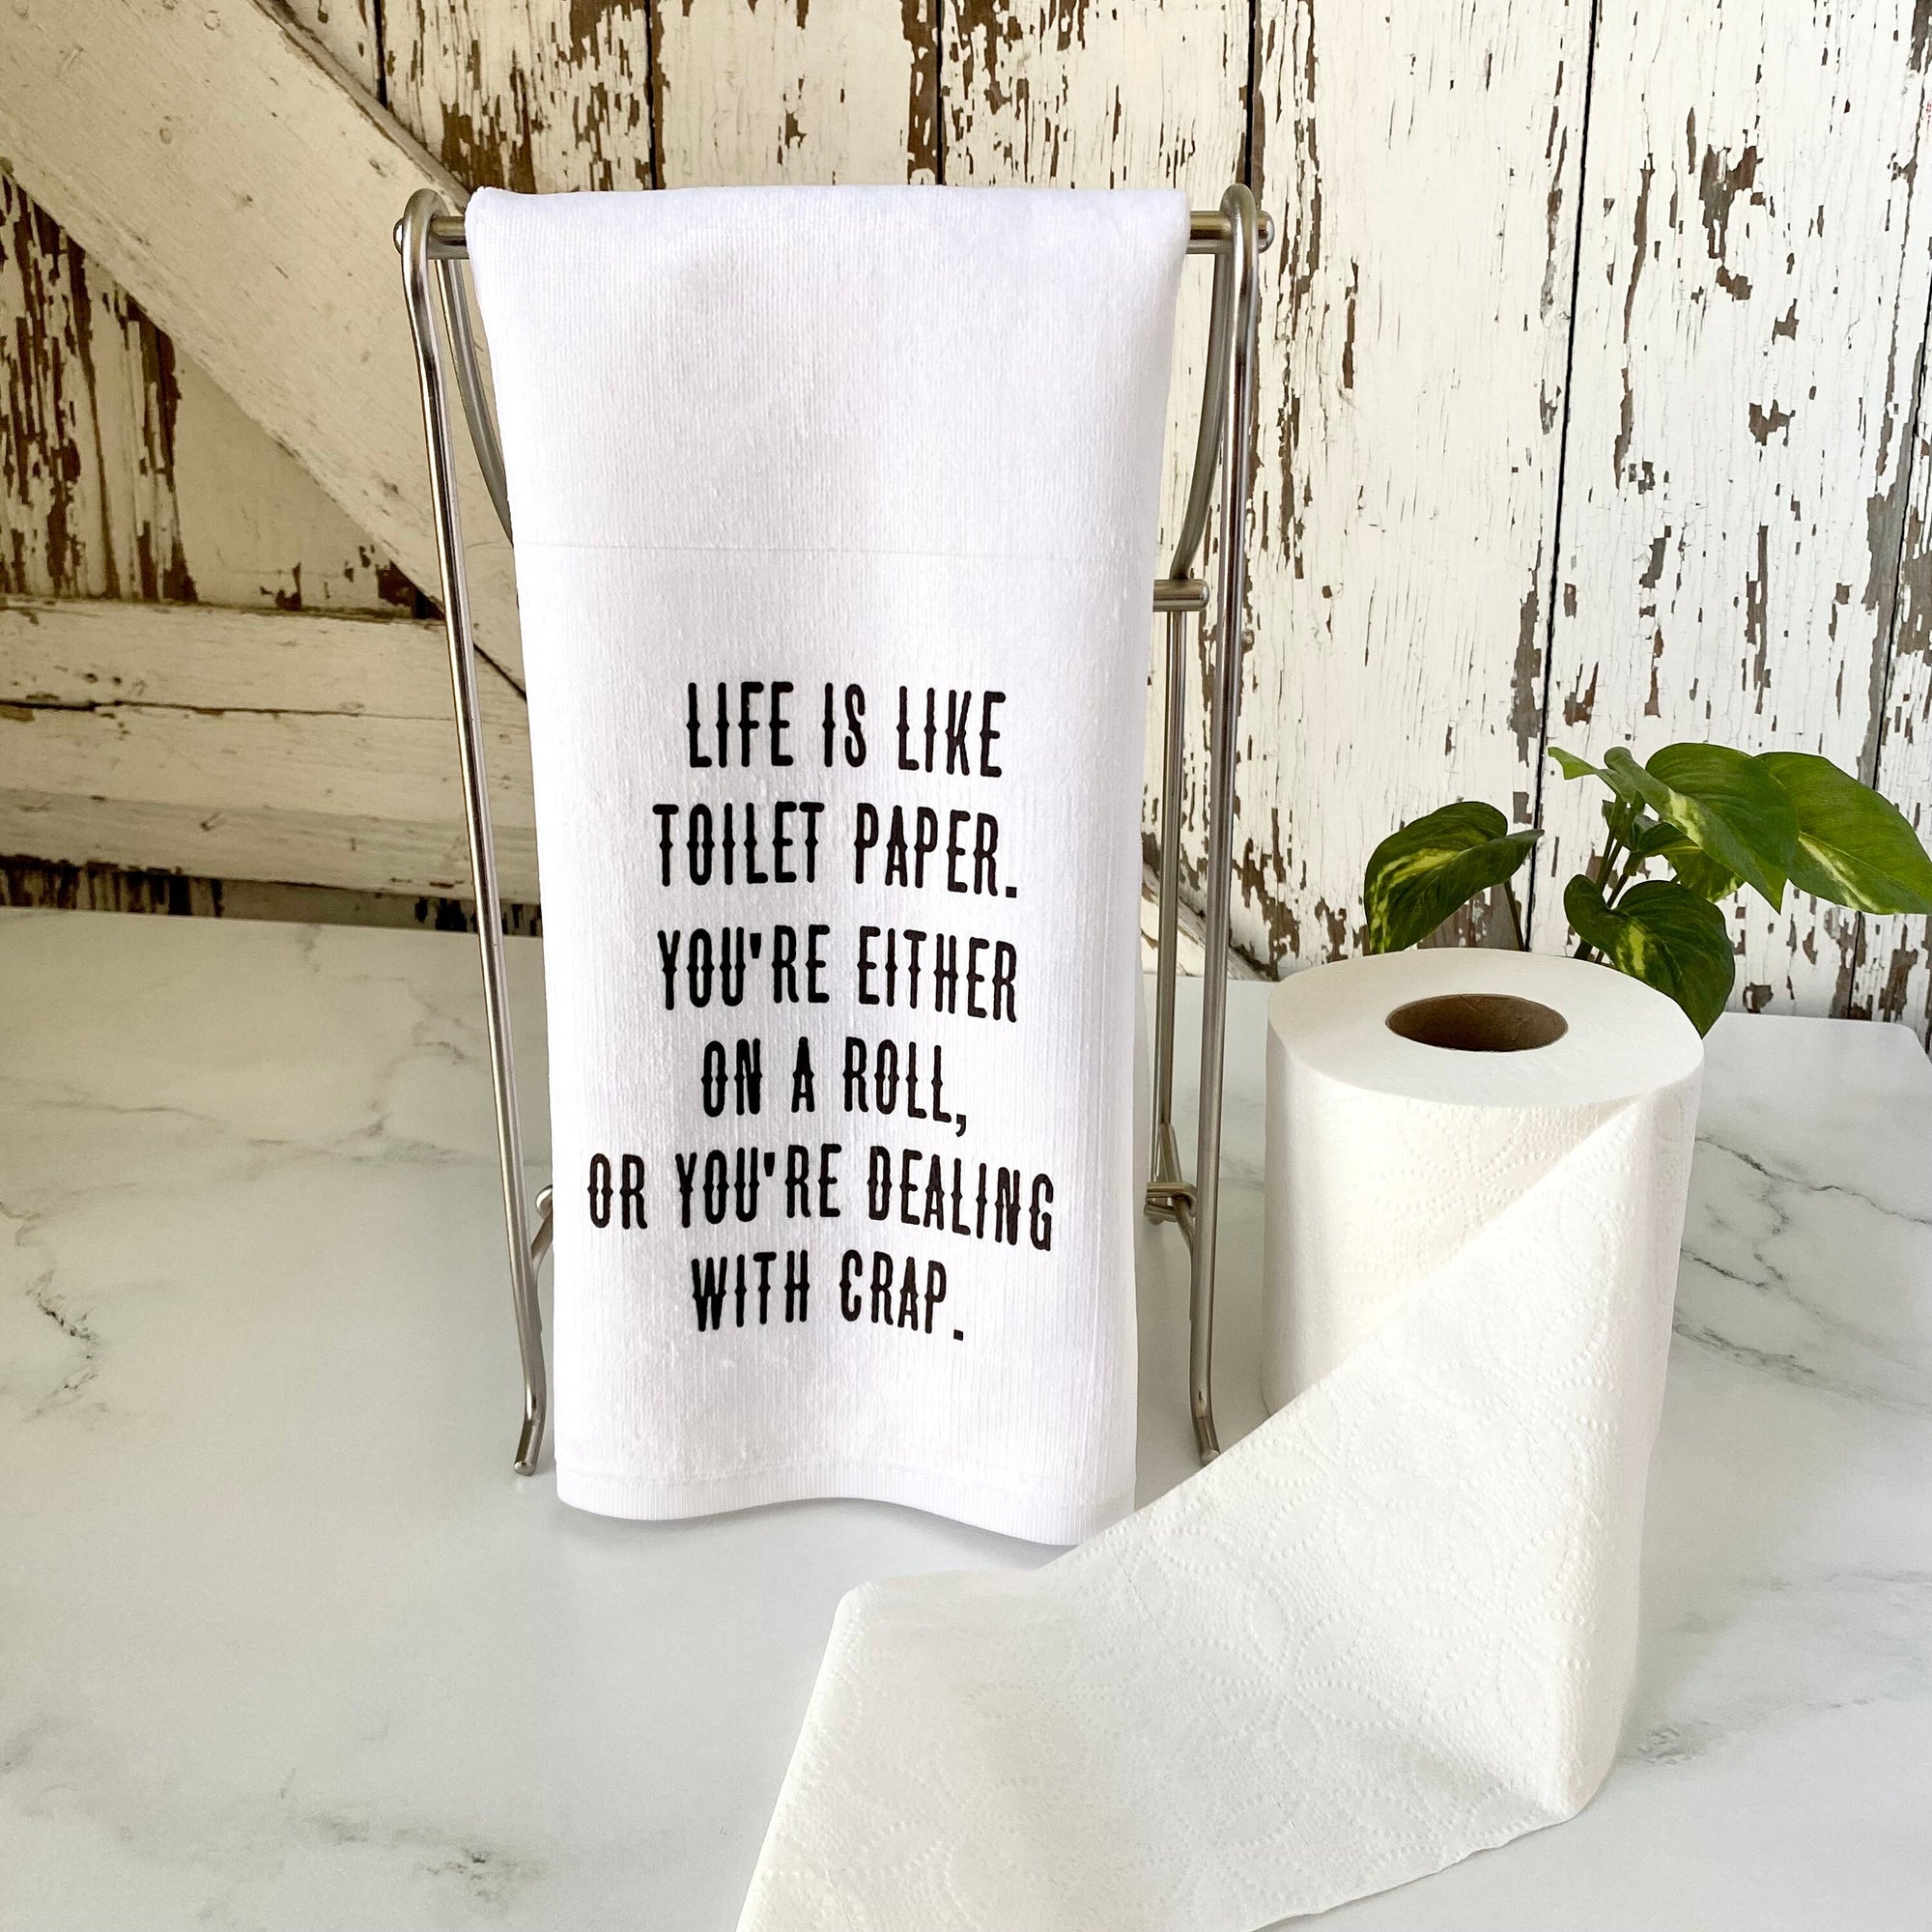 Life is like toilet paper. You’re either on a roll, or you’re dealing with crap.- Funny Handtowel- Bathroom Decor